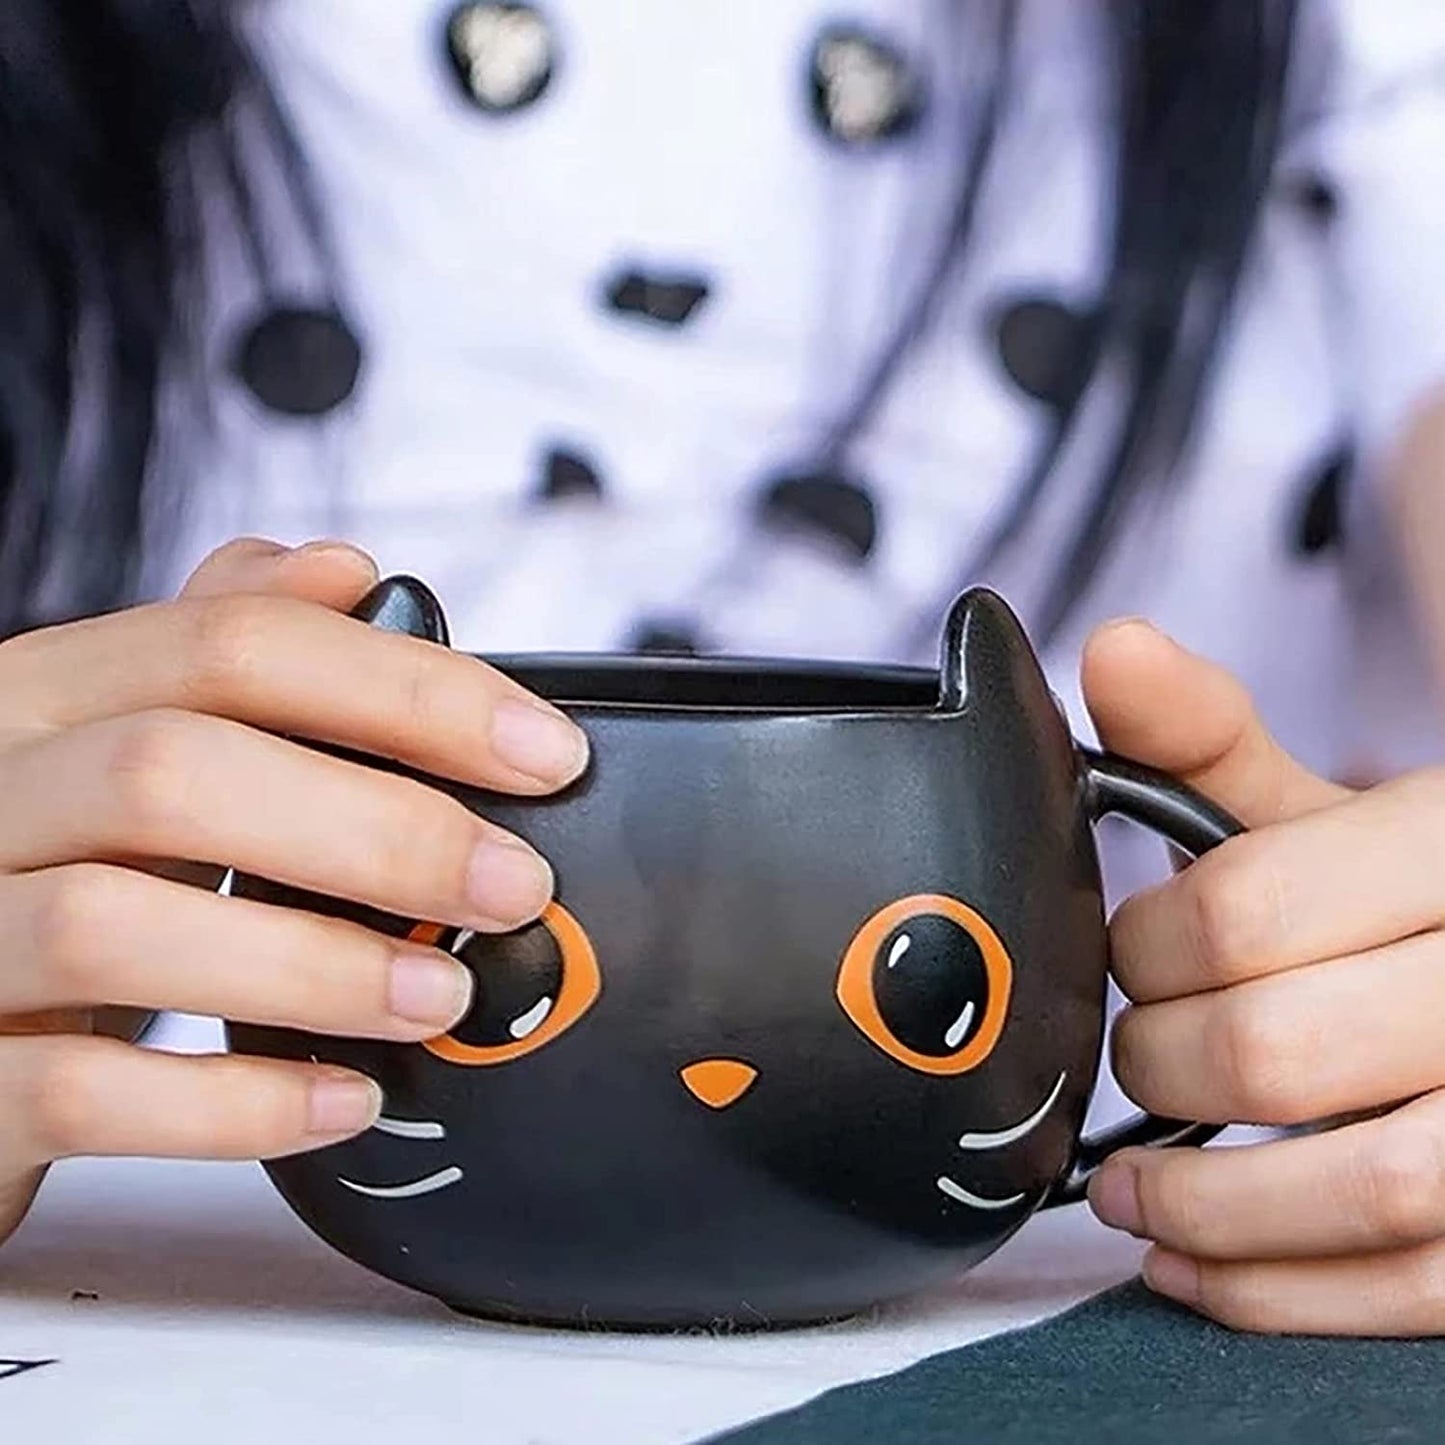 2021 Halloween Black Cat Cup with Witch Cap and Spoon Gifts, Cute Kitty Unique Ceramic Coffee Mug for Halloween Cat Lovers,Home Birthday Gift for Women Men (Cat Cup and Cover)